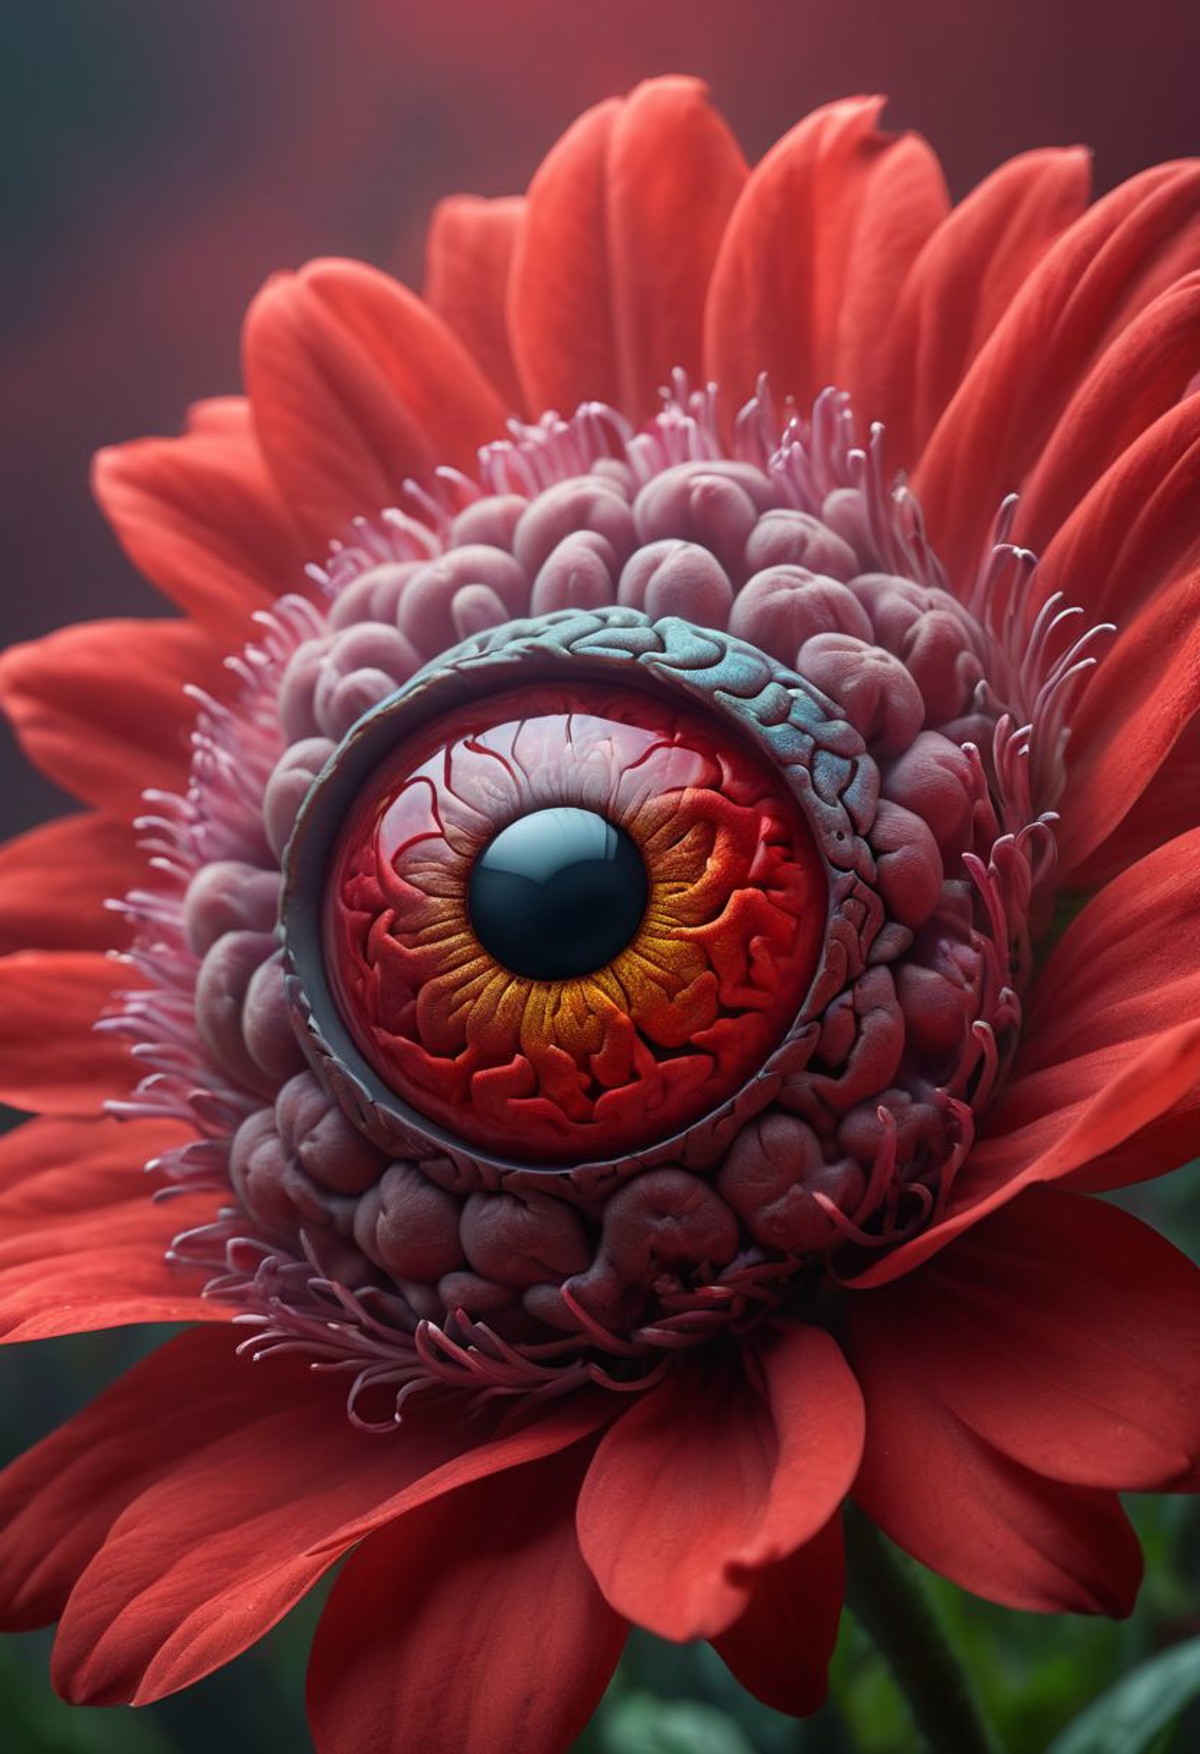 A large, red flower with a sharply focused eye at the center. 